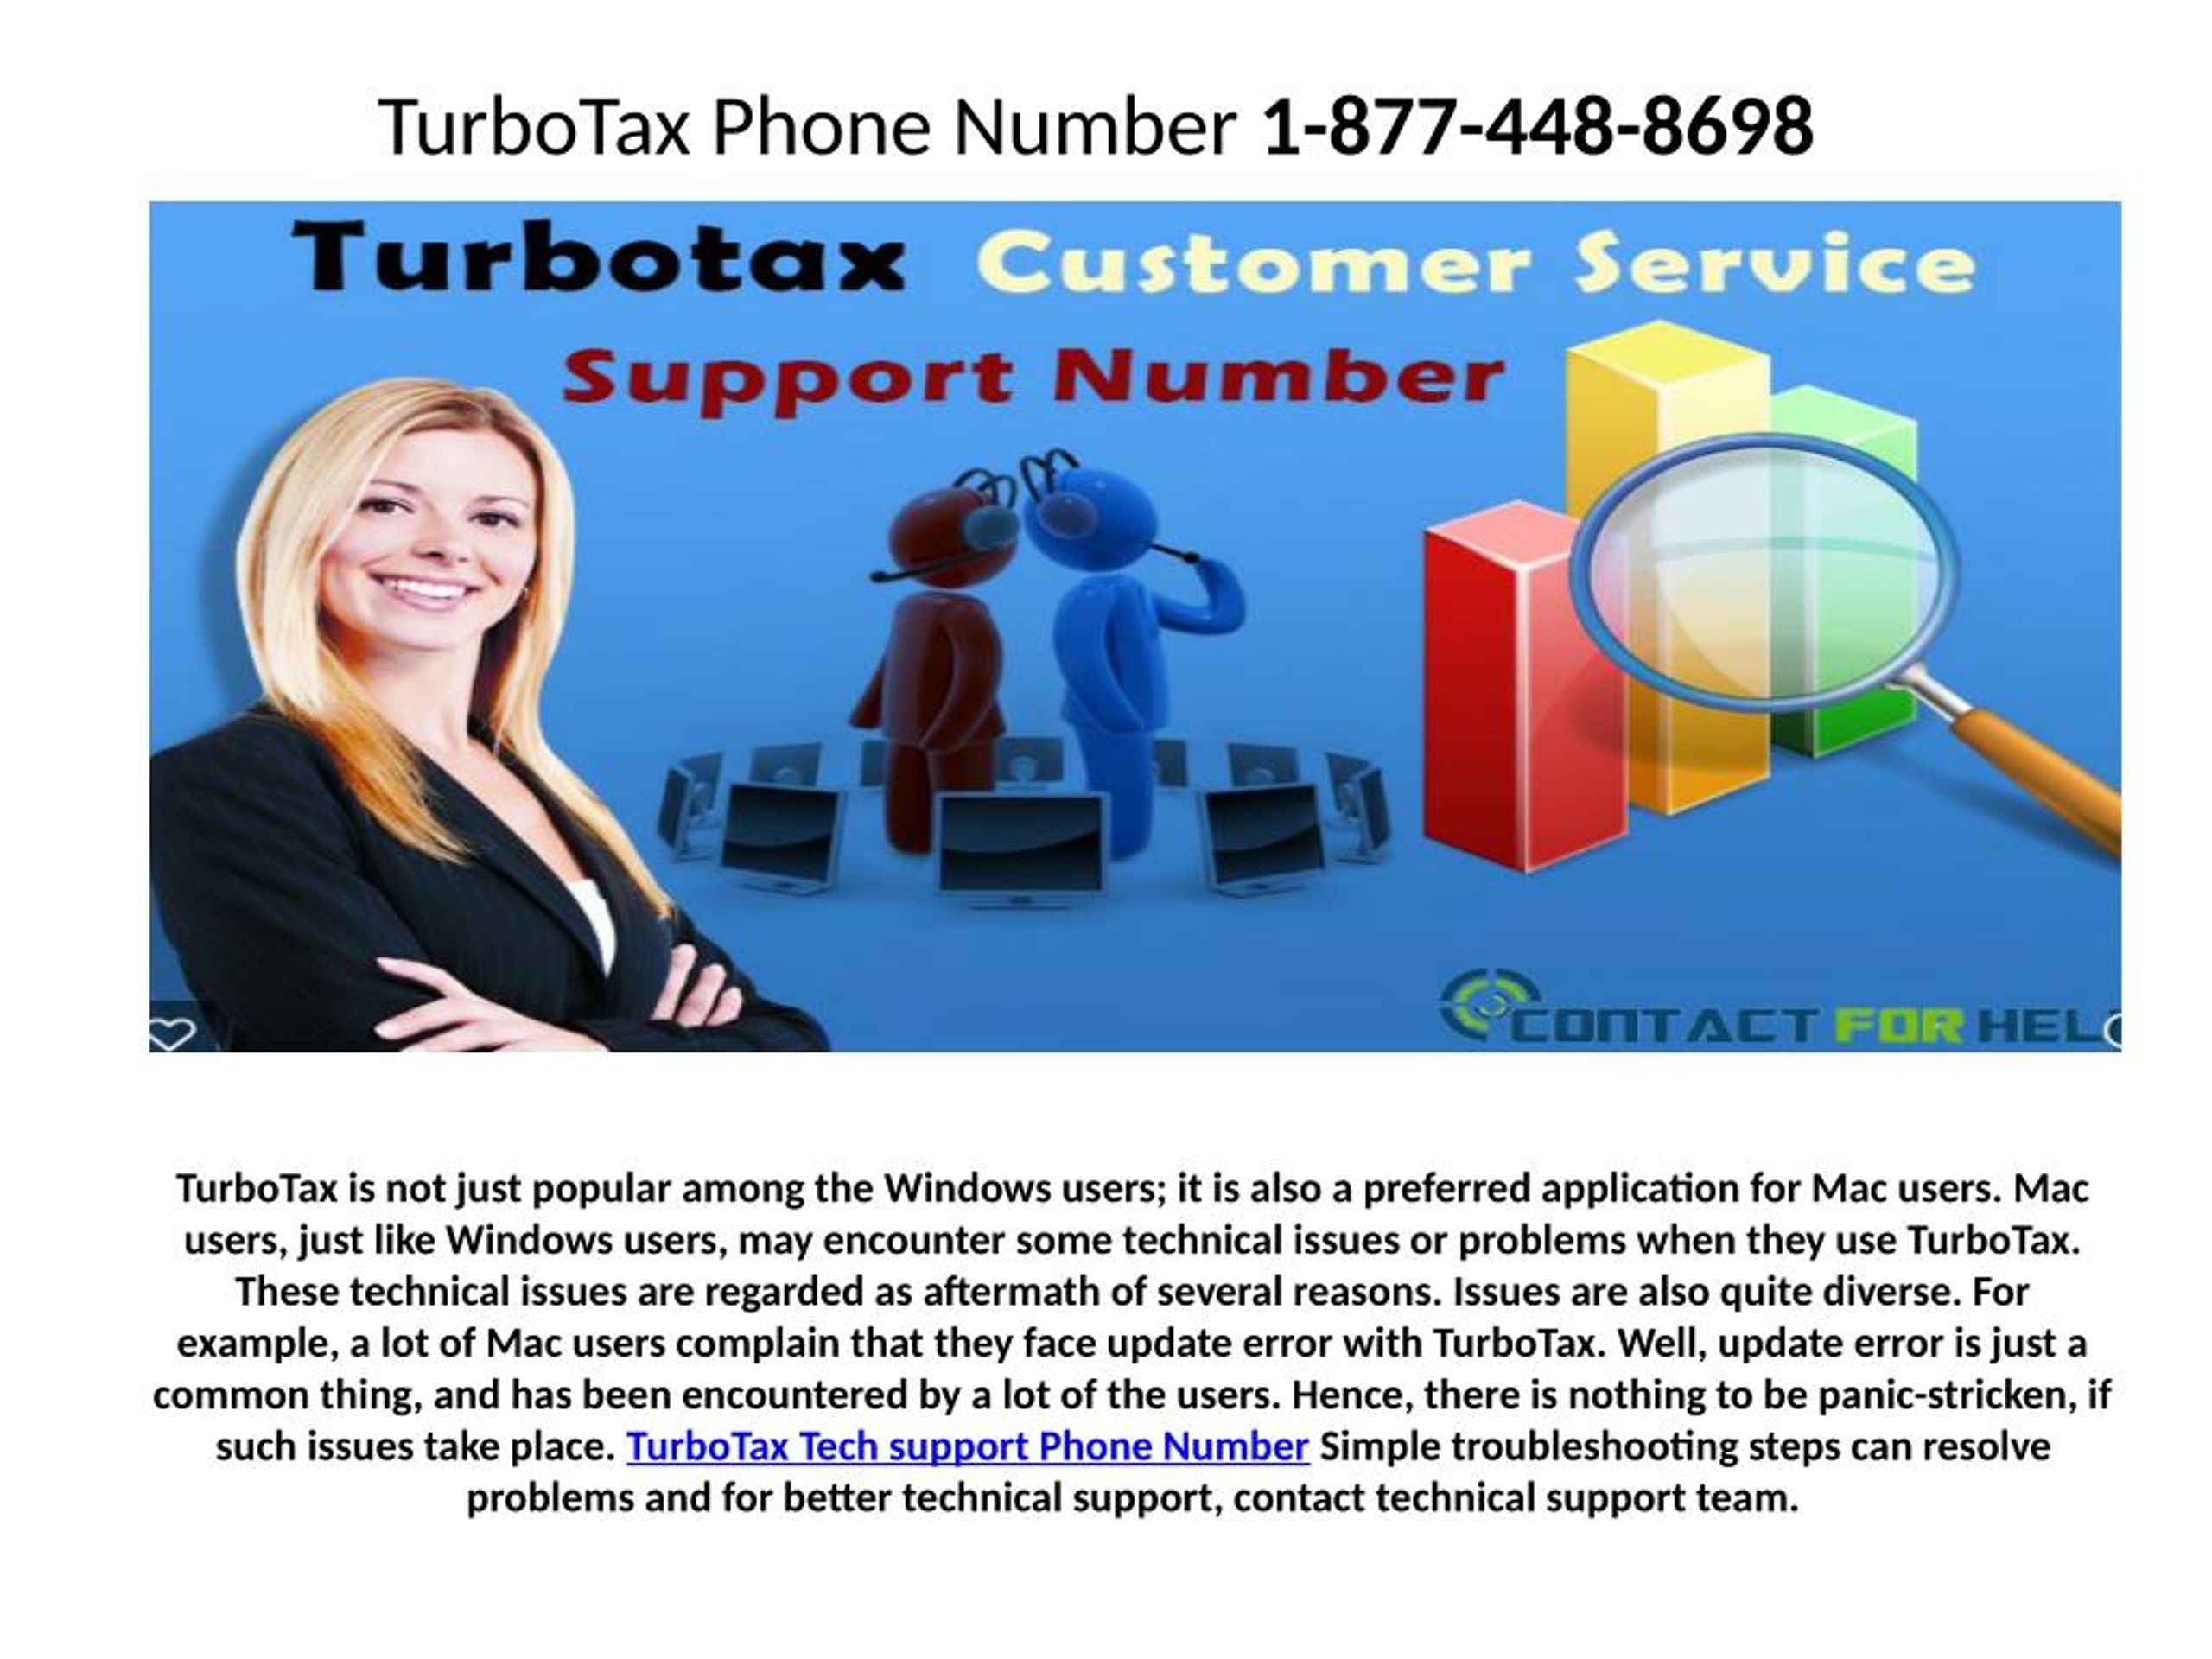 give me a phone number for turbotax